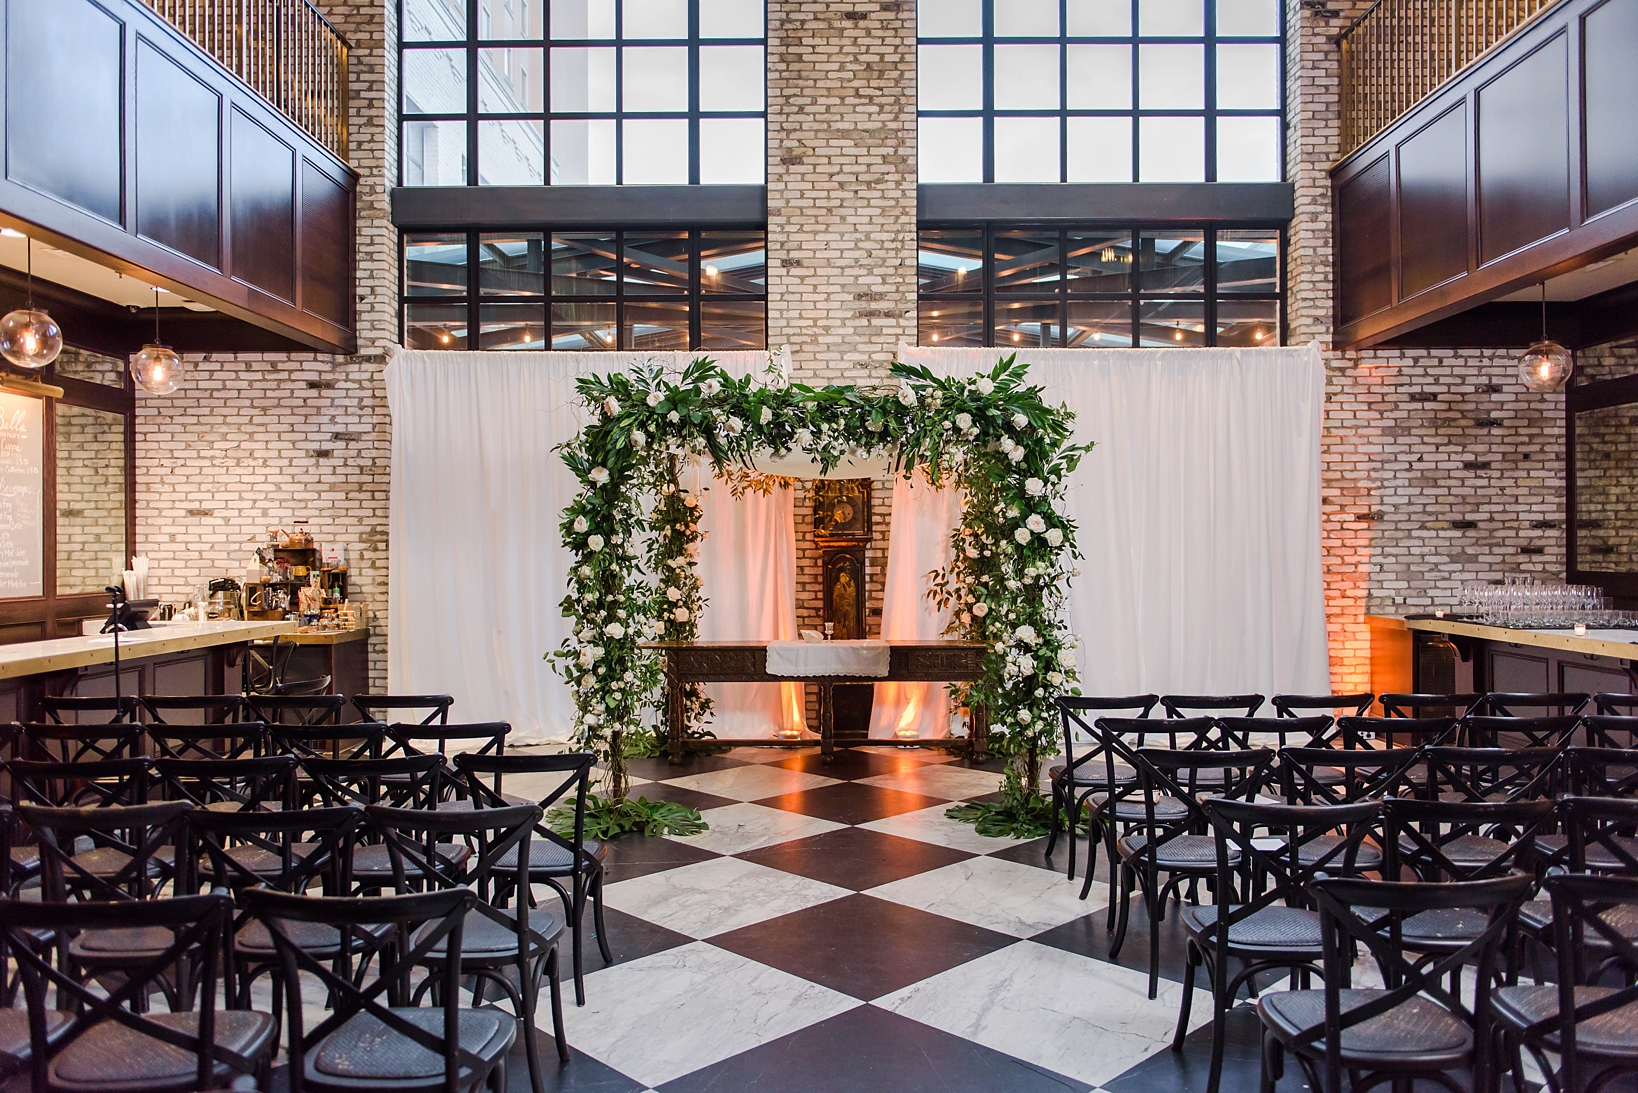 The huppah covered in florals at the Oxford Exchange in Tampa, FL